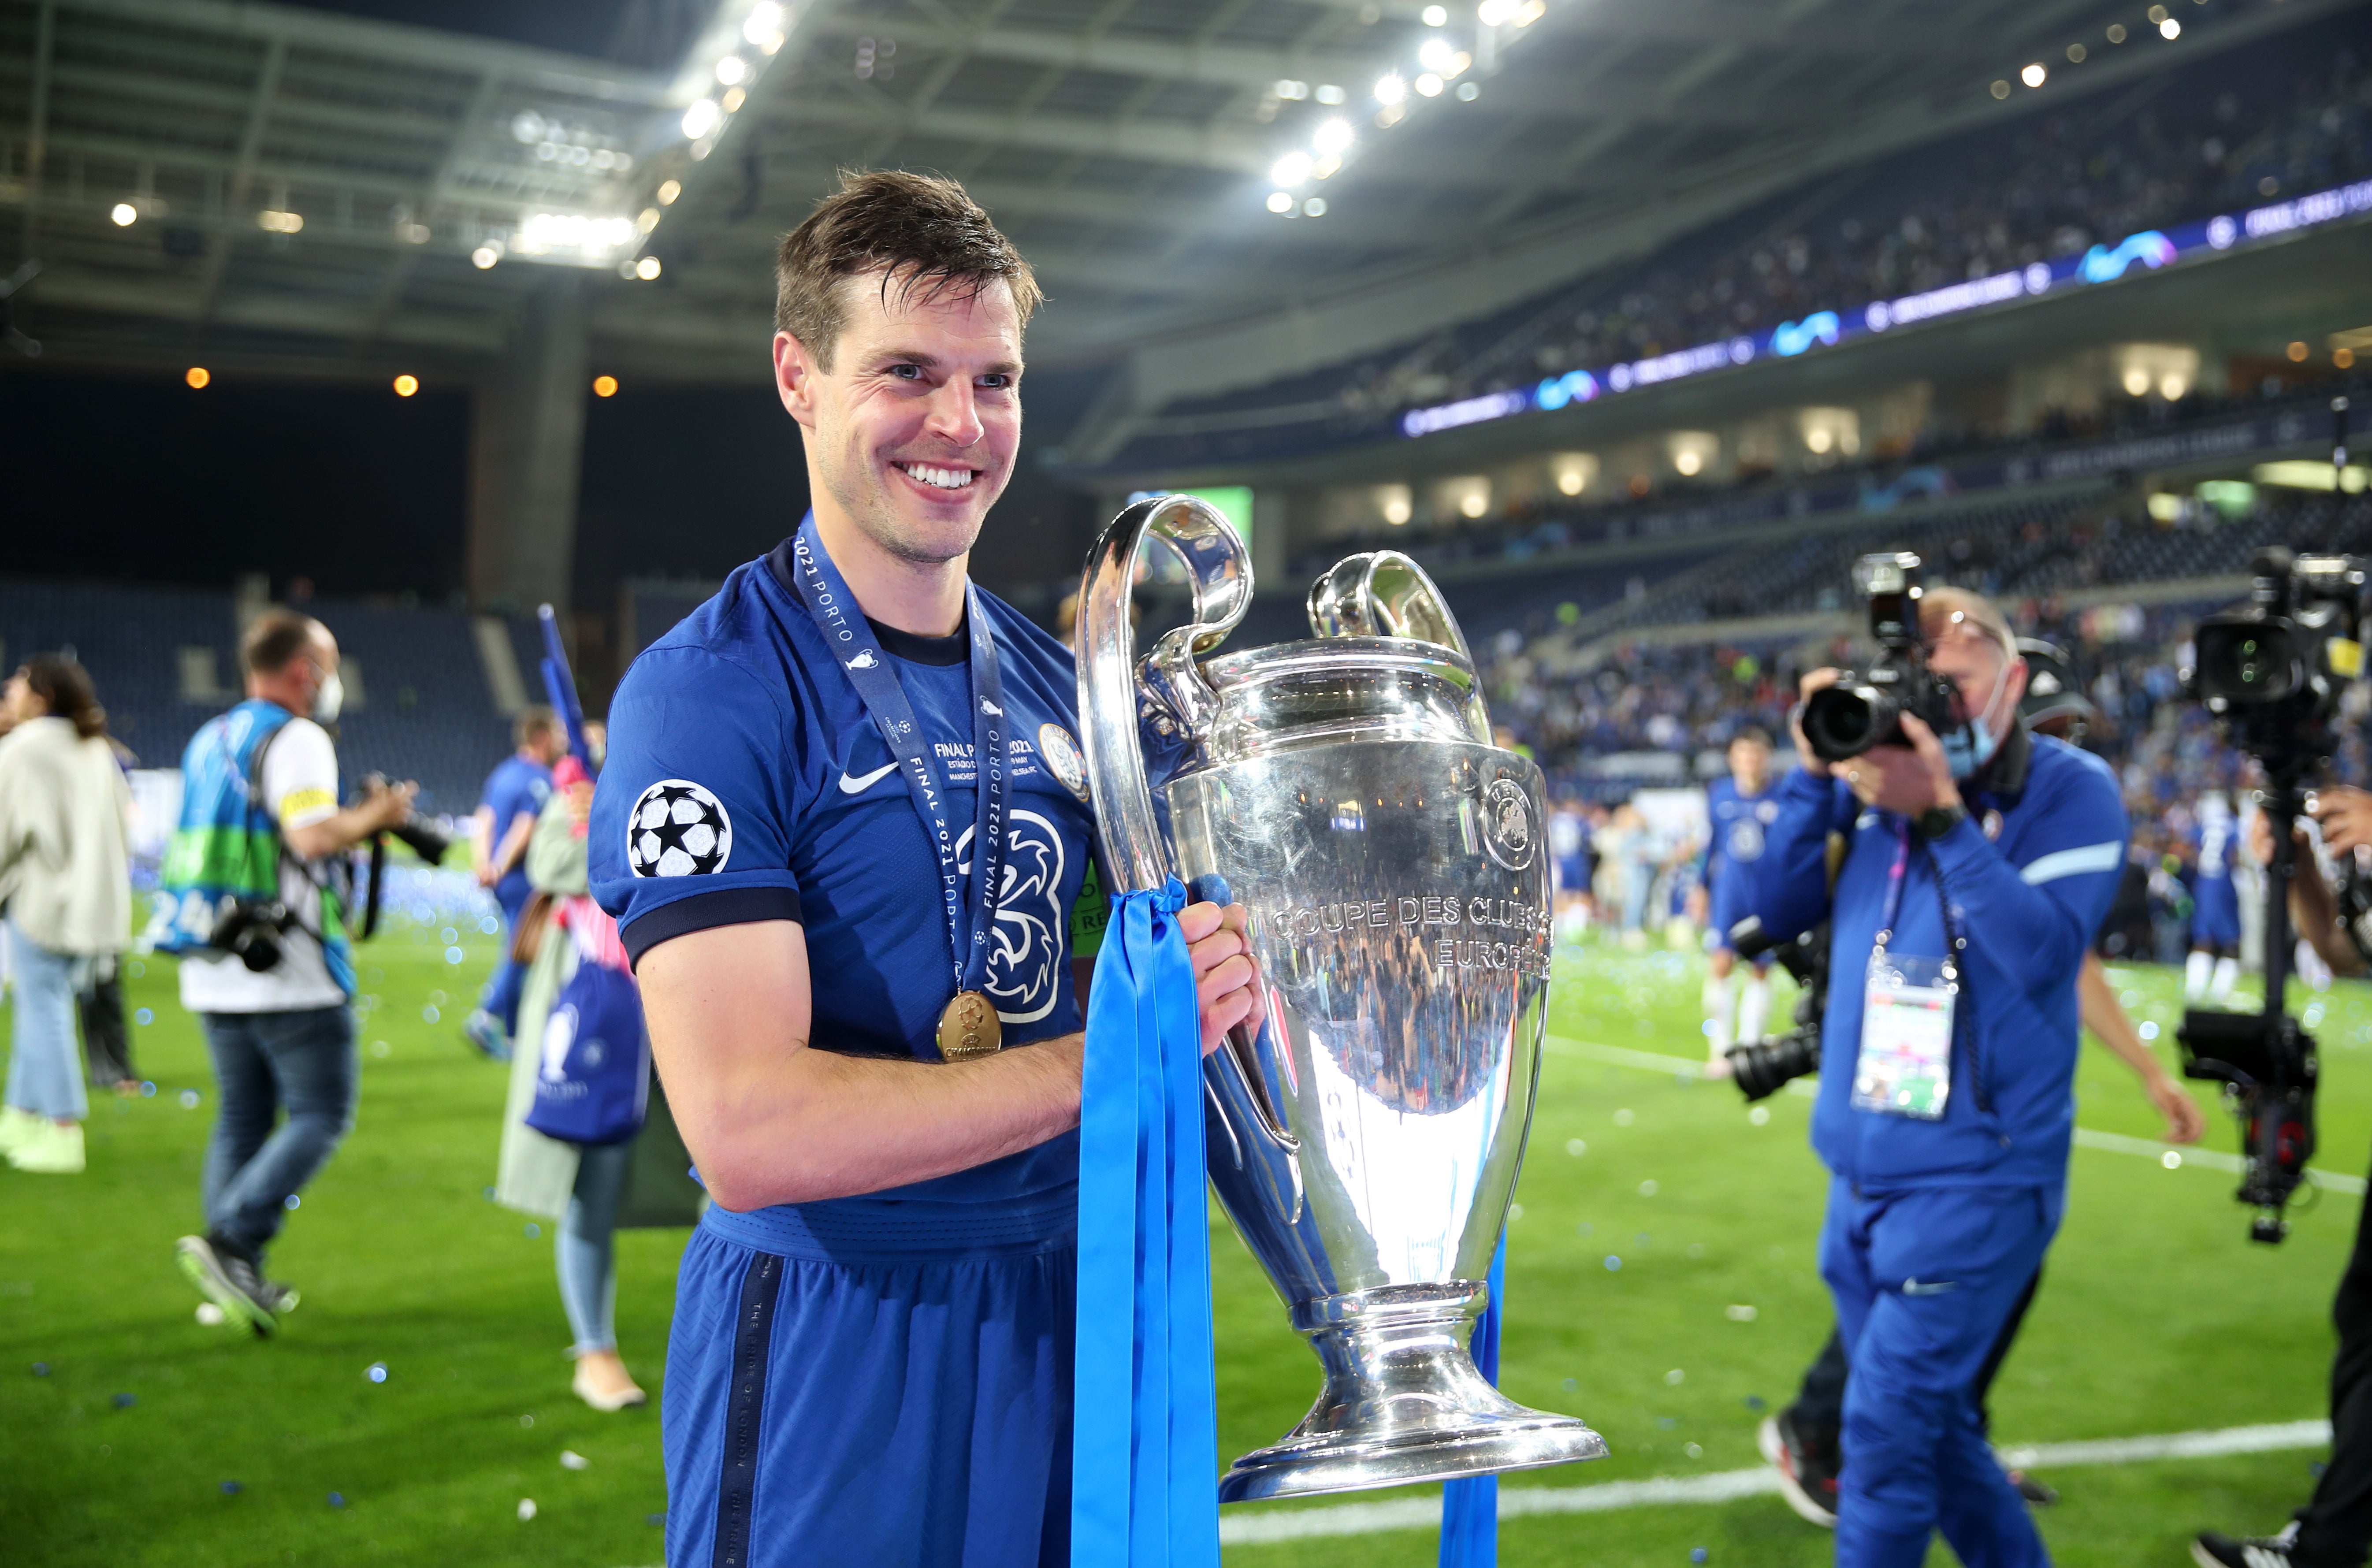 Cesar Azpilicueta, pictured, wants to stay longer at Chelsea and carve out more memorable moments like lifting the Champions League trophy (Nick Potts/PA)